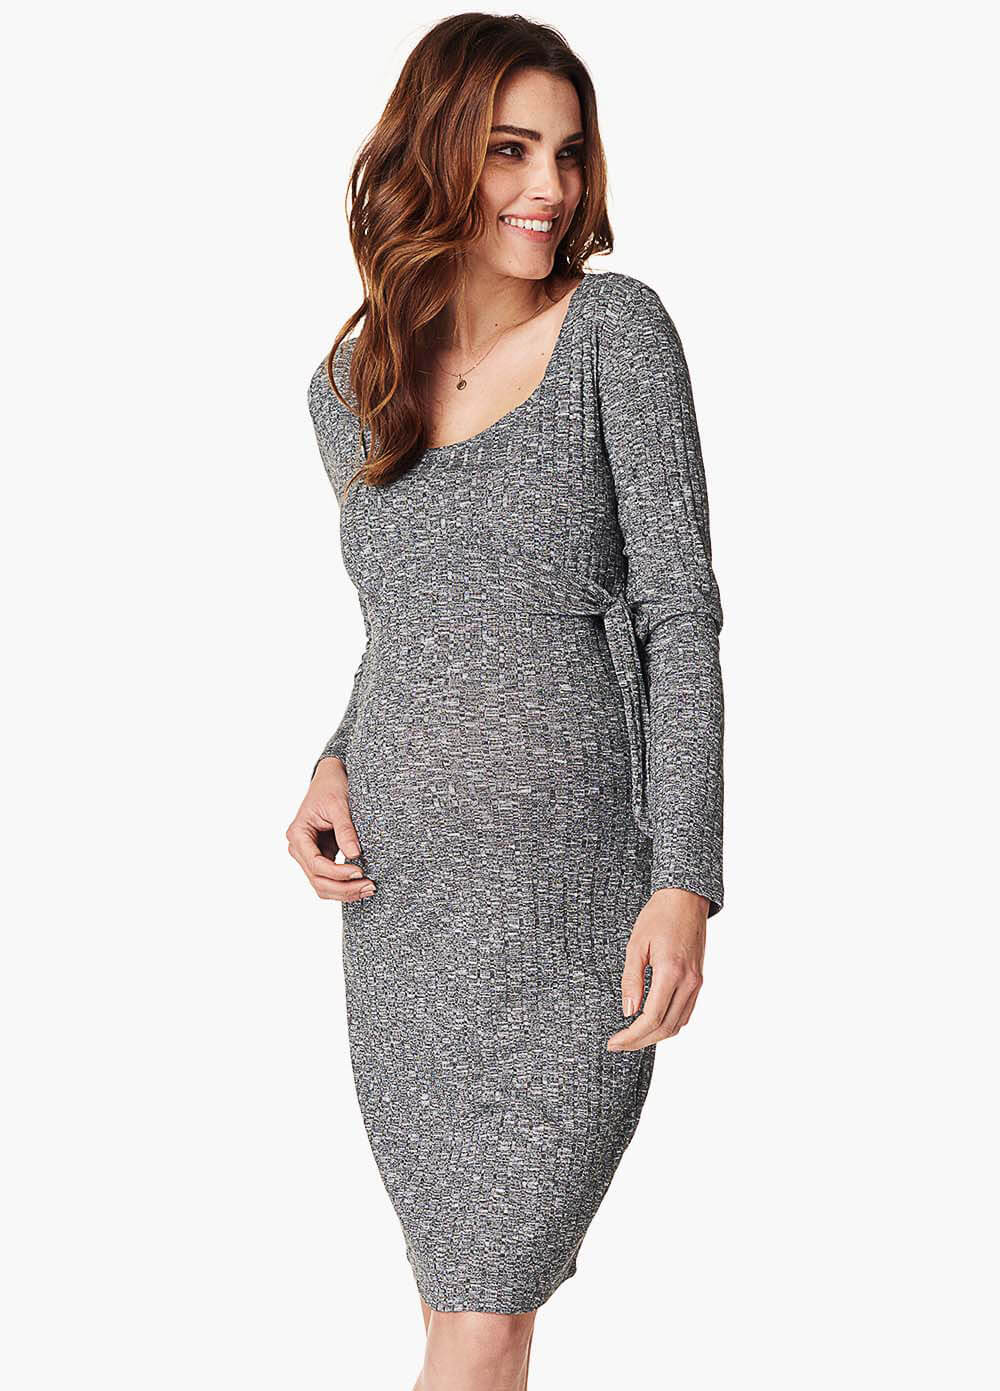 Queen Bee Giulia Knit Maternity Nursing Dress in Grey by Noppies